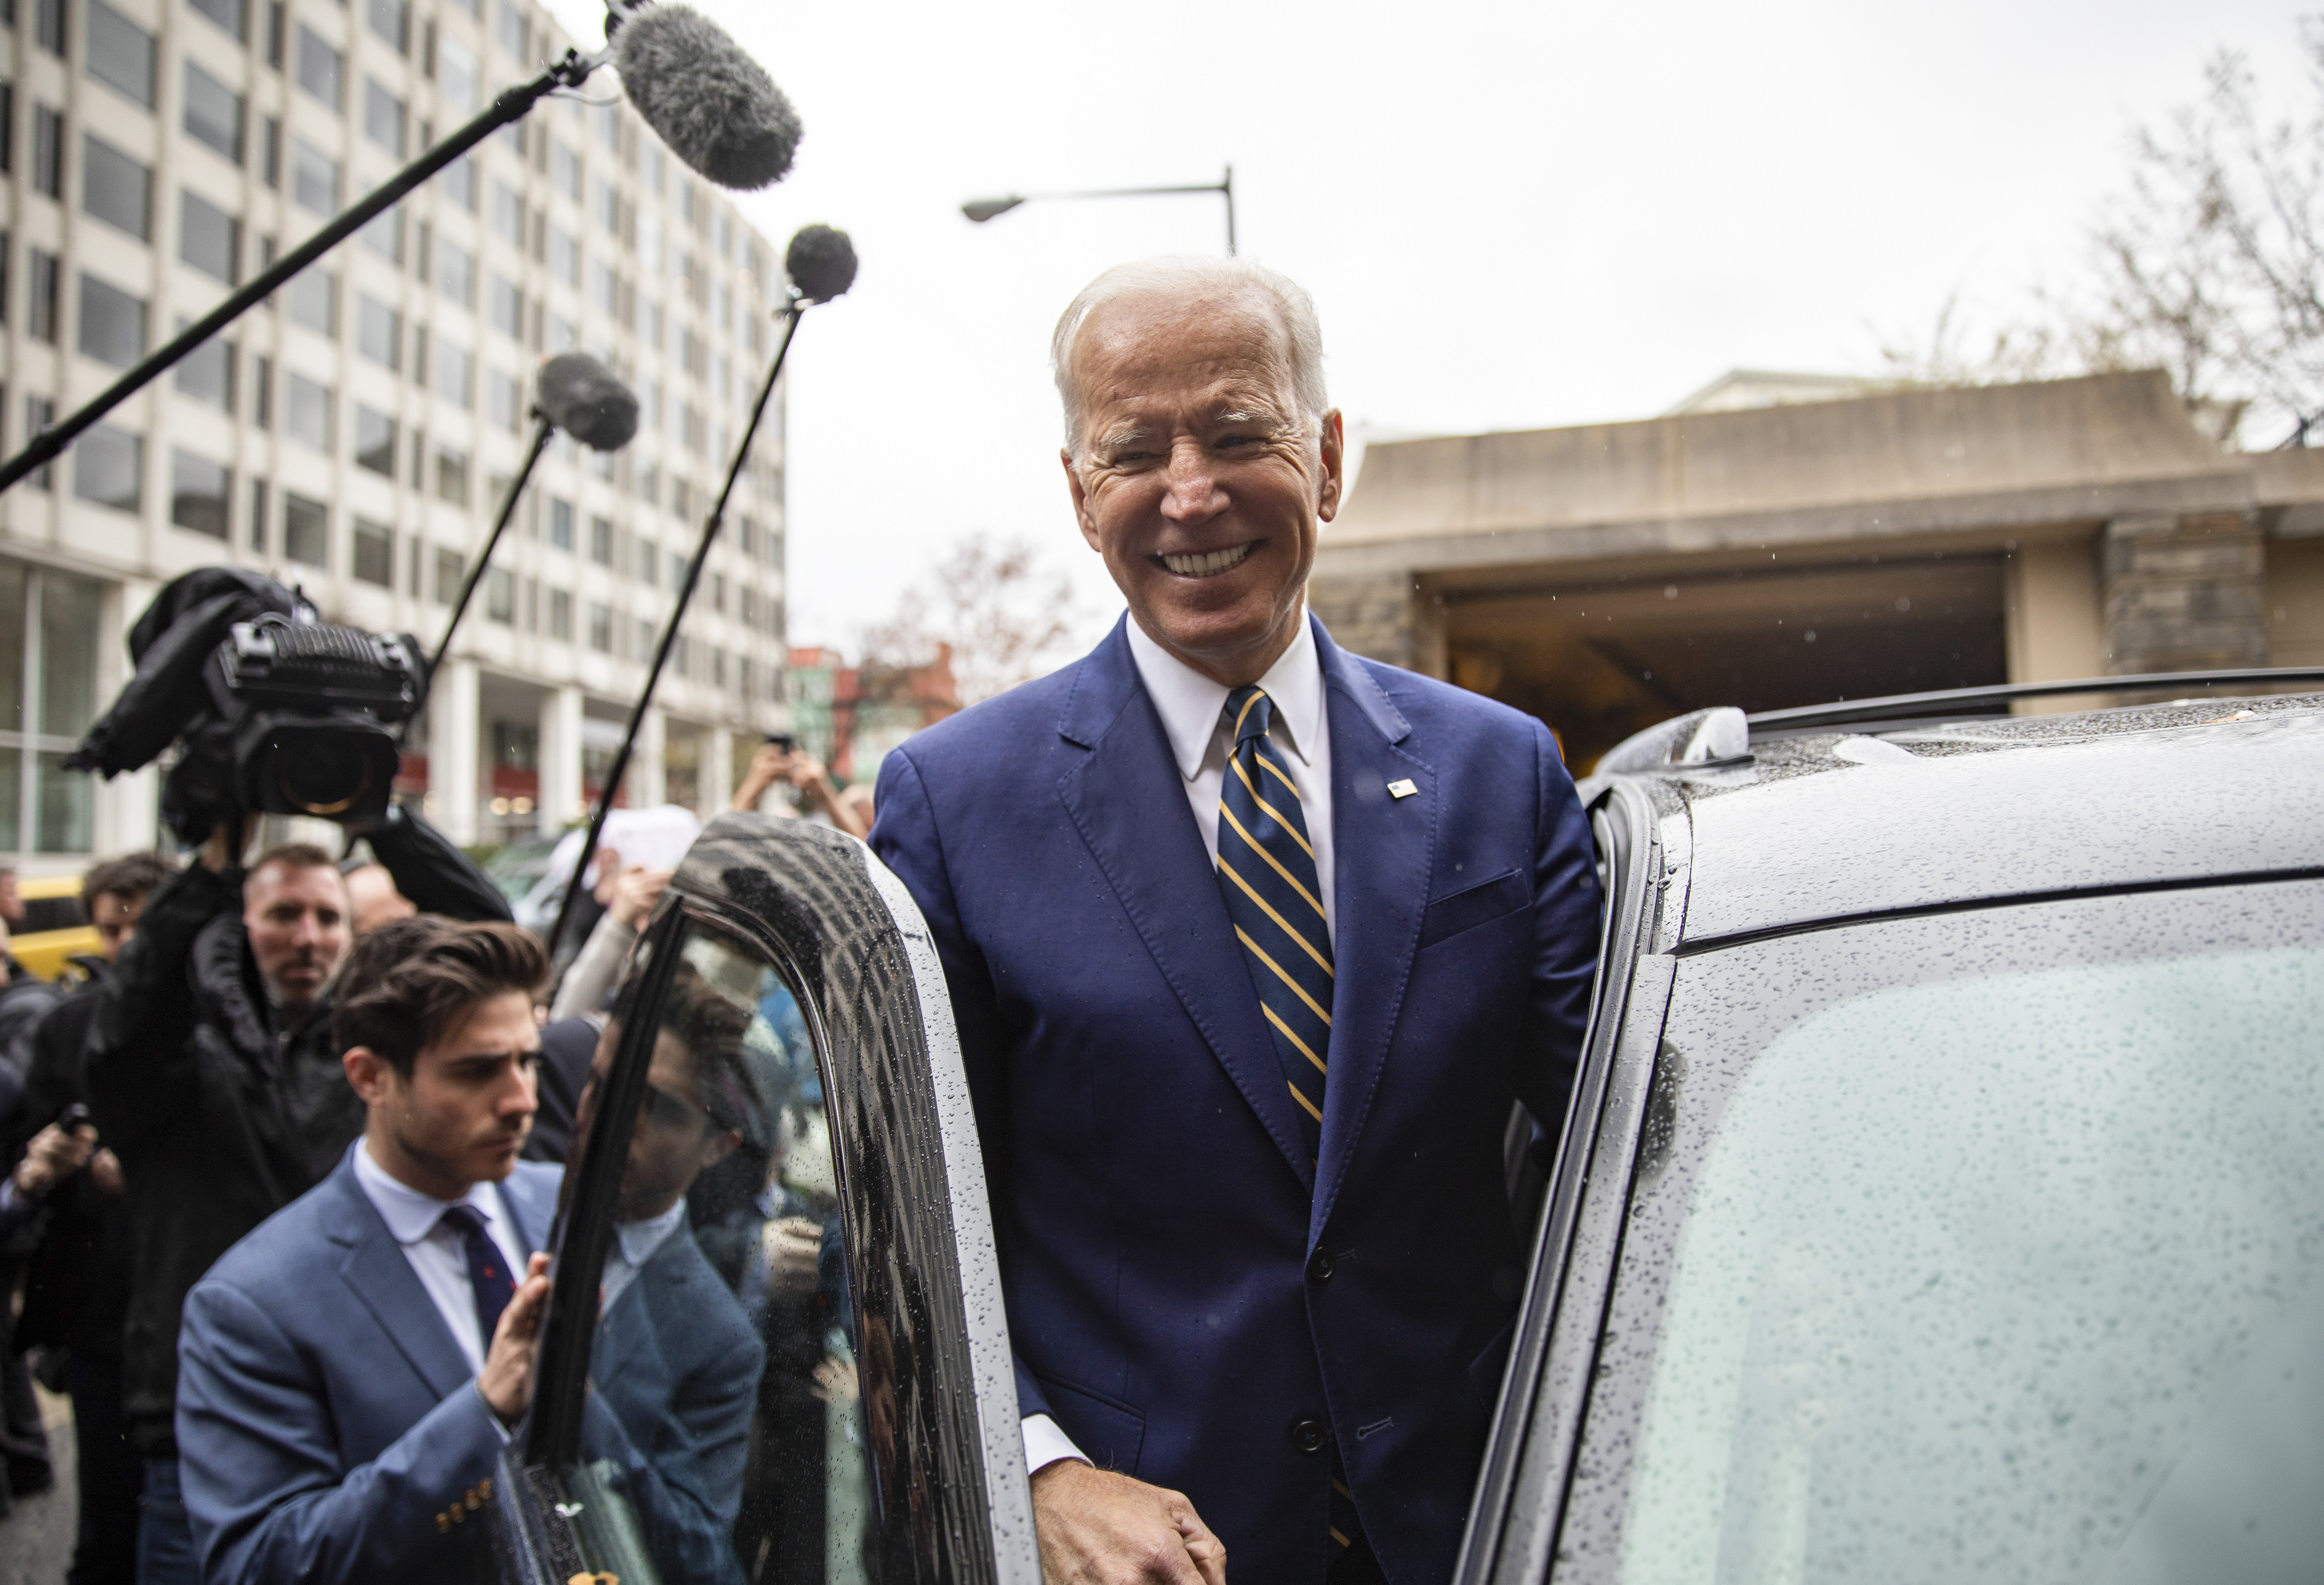 WASHINGTON, DC - APRIL 05: Former Vice President Joe Biden waves to supporters at the International Brotherhood of Electrical Workers Construction and Maintenance conference on April 05, 2019 in Washington, DC. Former Vice President Joe Biden on Friday called President Donald Trump a "tragedy in two acts" for the way he characterizes people and is consumed with personal grievances. (Photo by Tasos Katopodis/Getty Images)